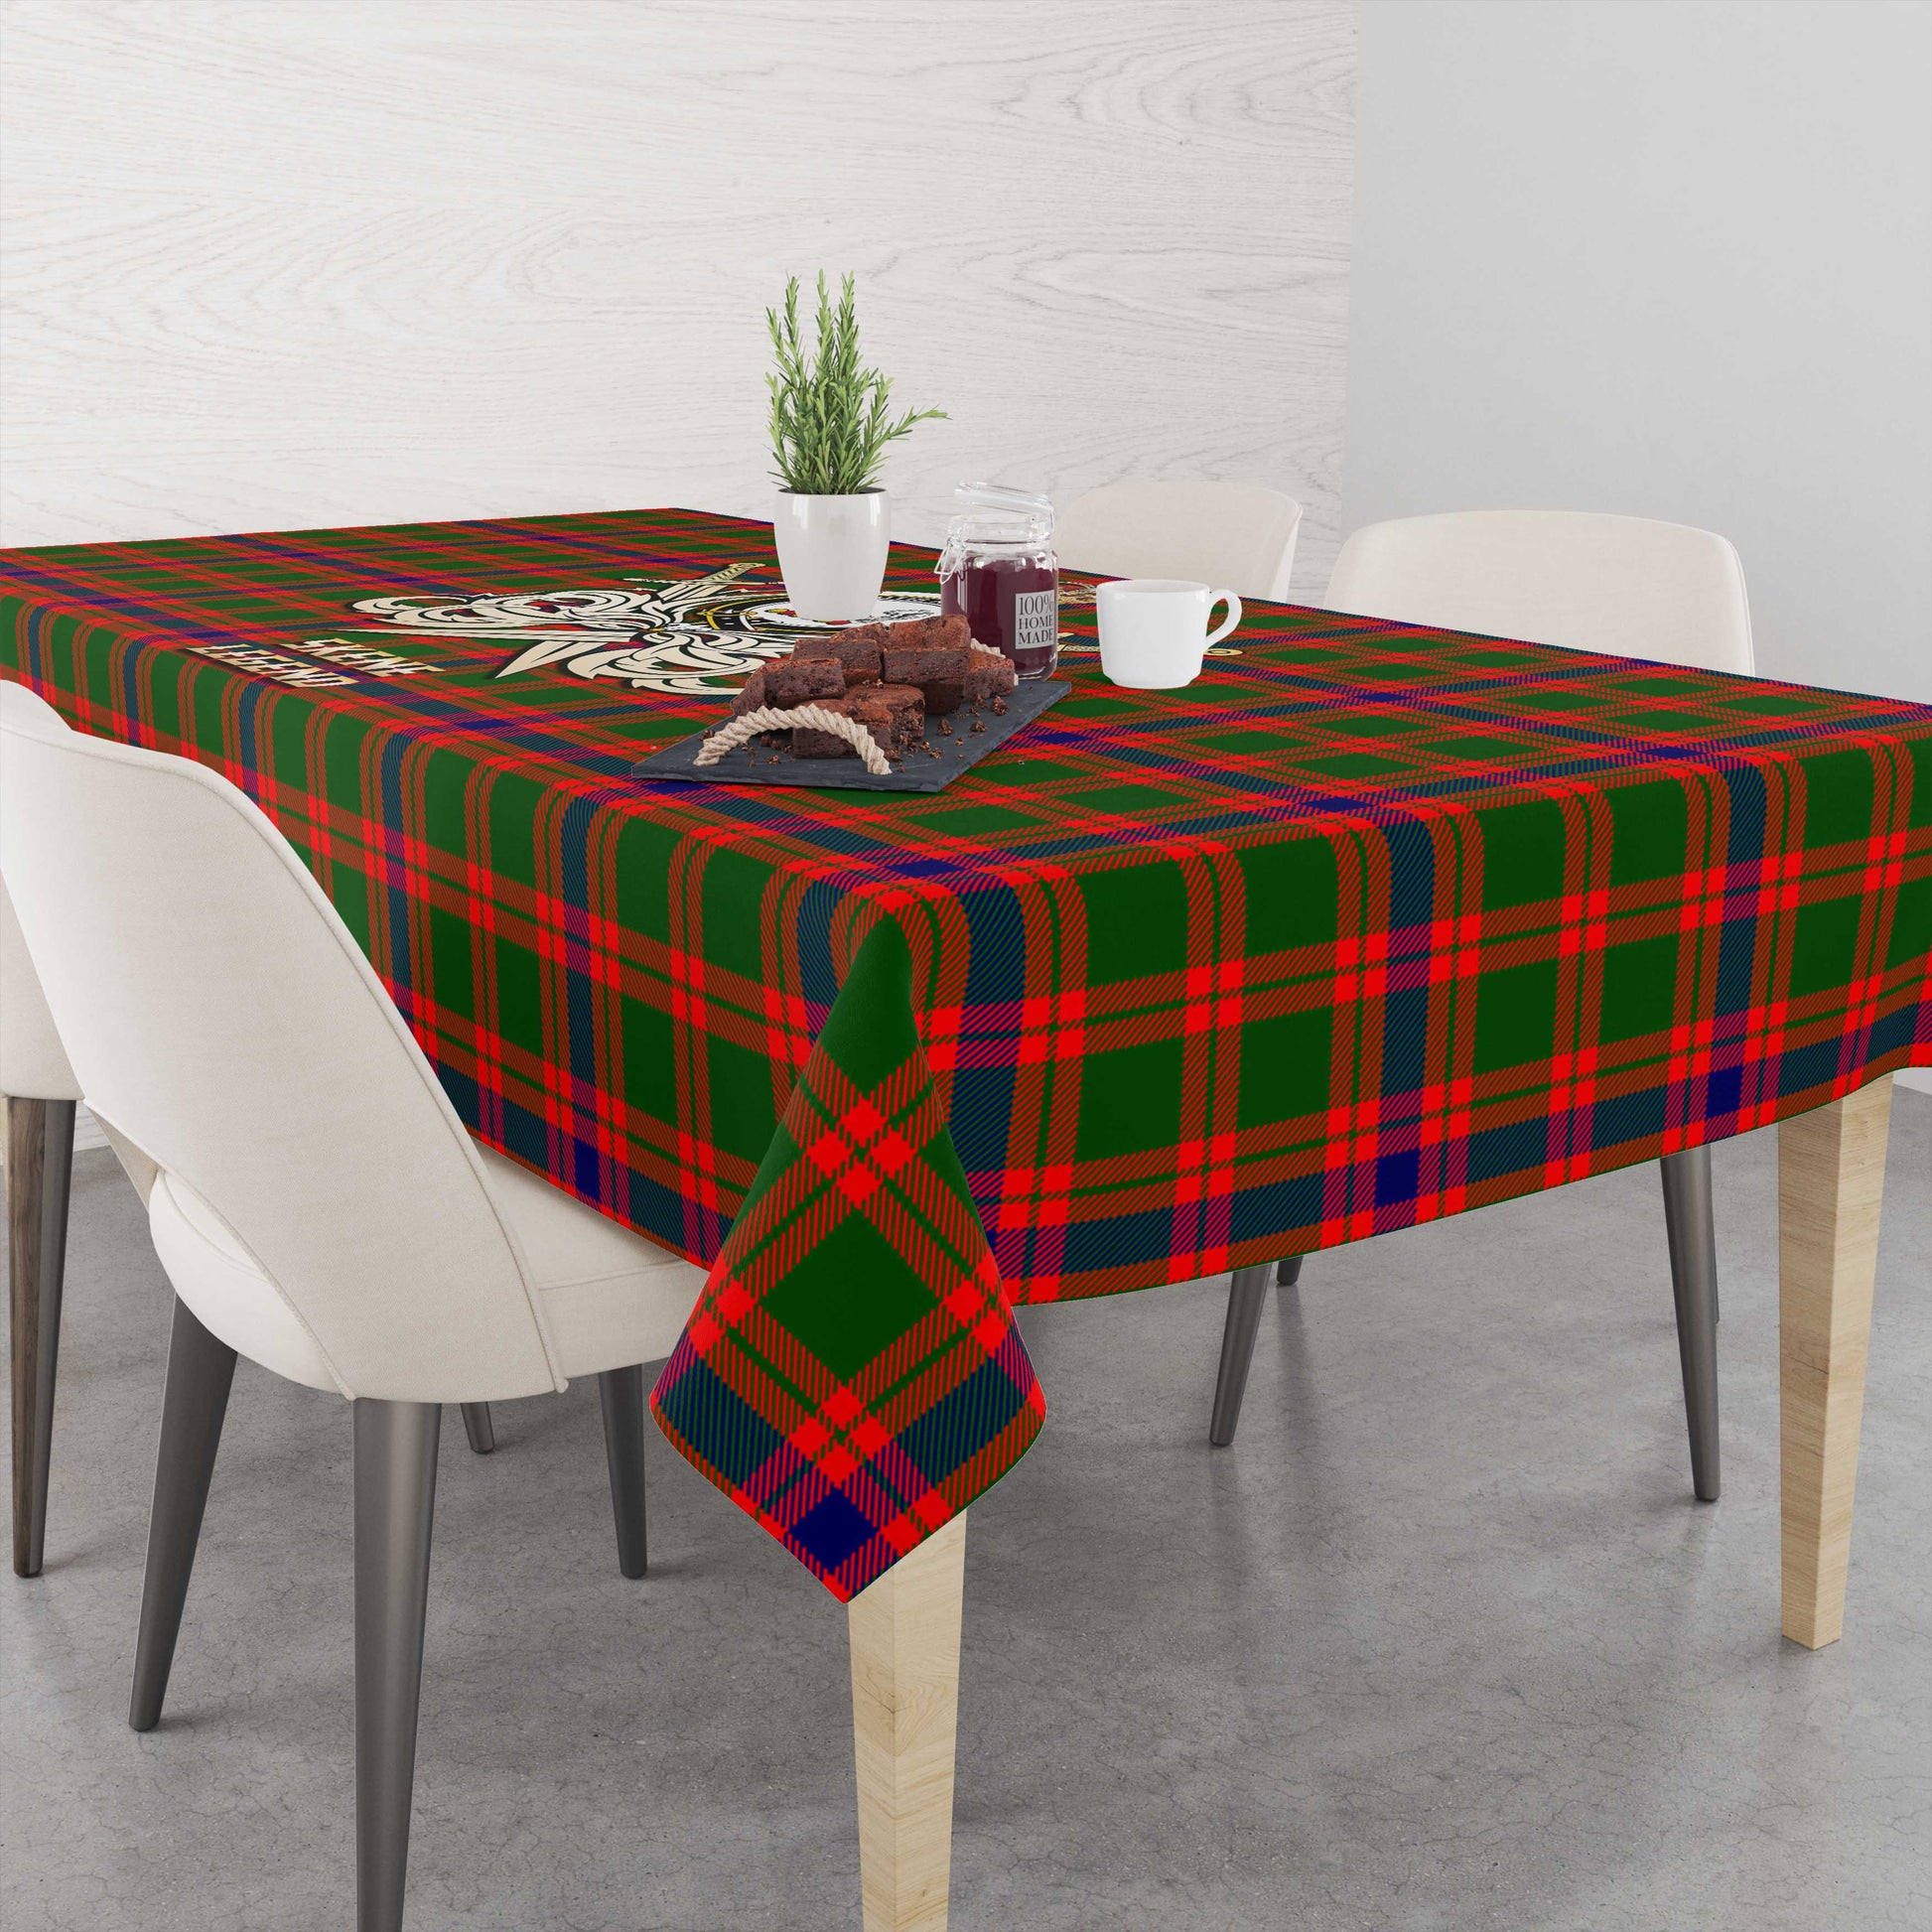 Tartan Vibes Clothing Skene Modern Tartan Tablecloth with Clan Crest and the Golden Sword of Courageous Legacy